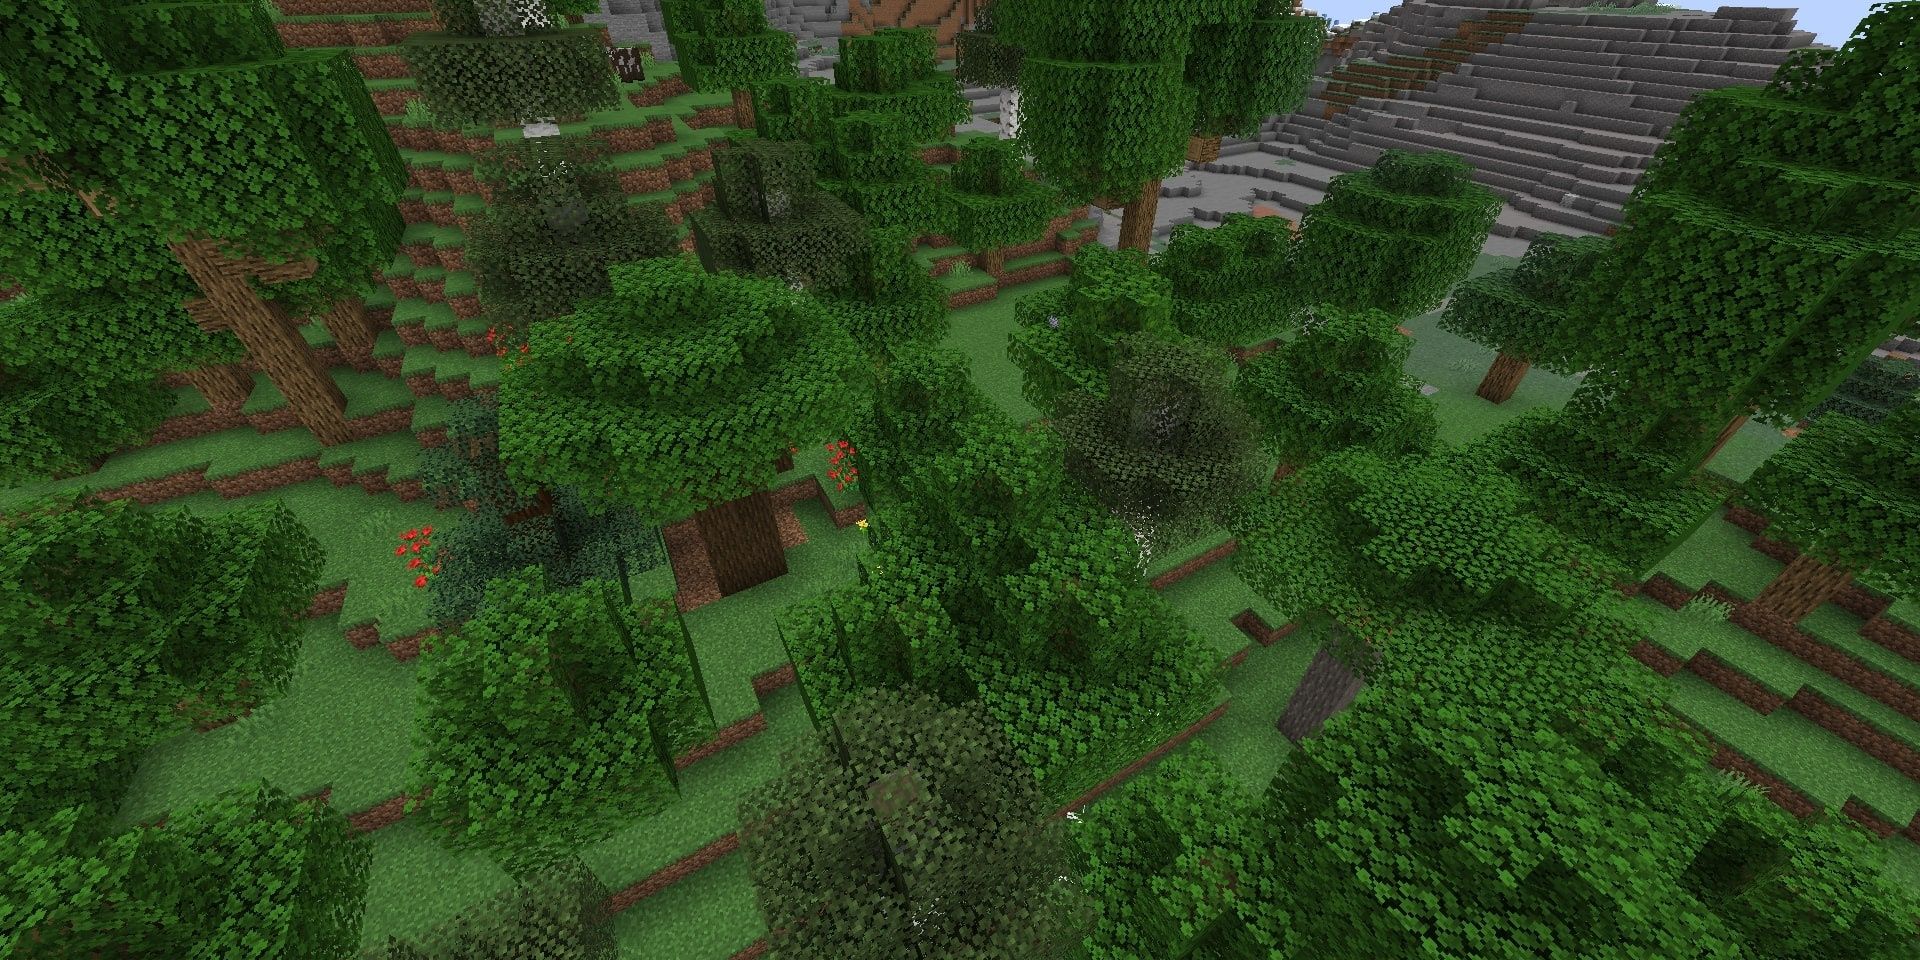 Many of the trees and leaves in Minecraft